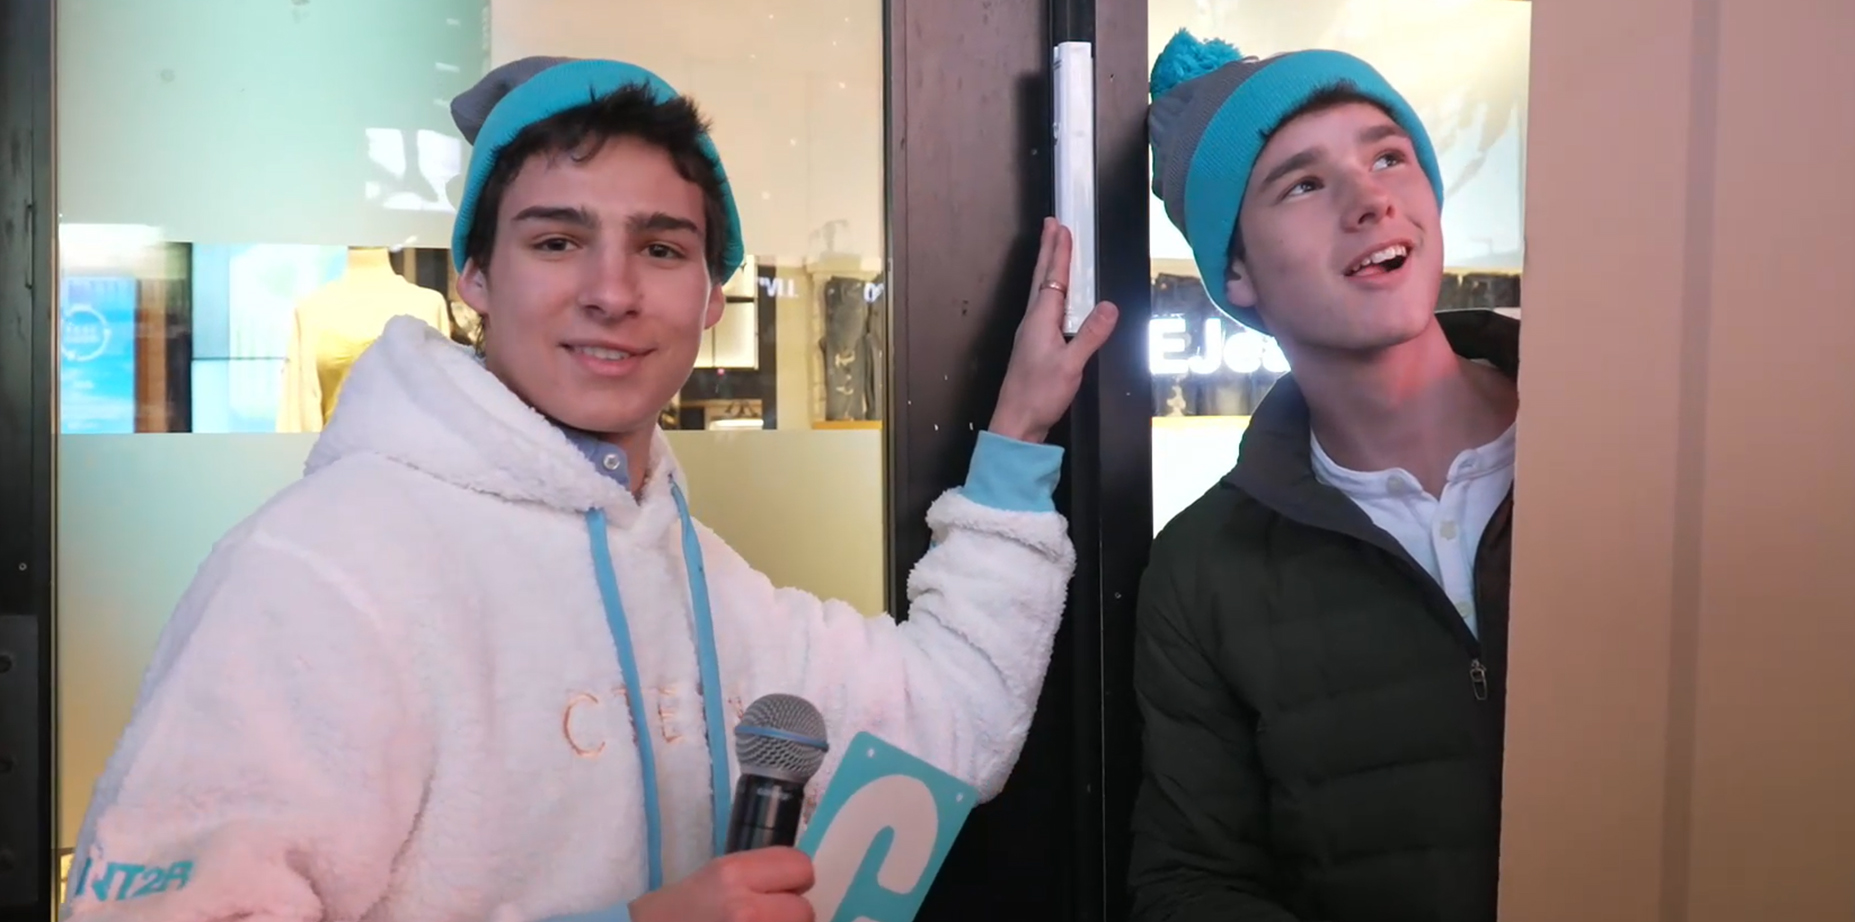 Attendees of a Chabad teen convention in Times Square pose next to the mezuzah affixed to the doorpost of American Eagle Outfitters’ flagship store. (Courtesy of Chabad)